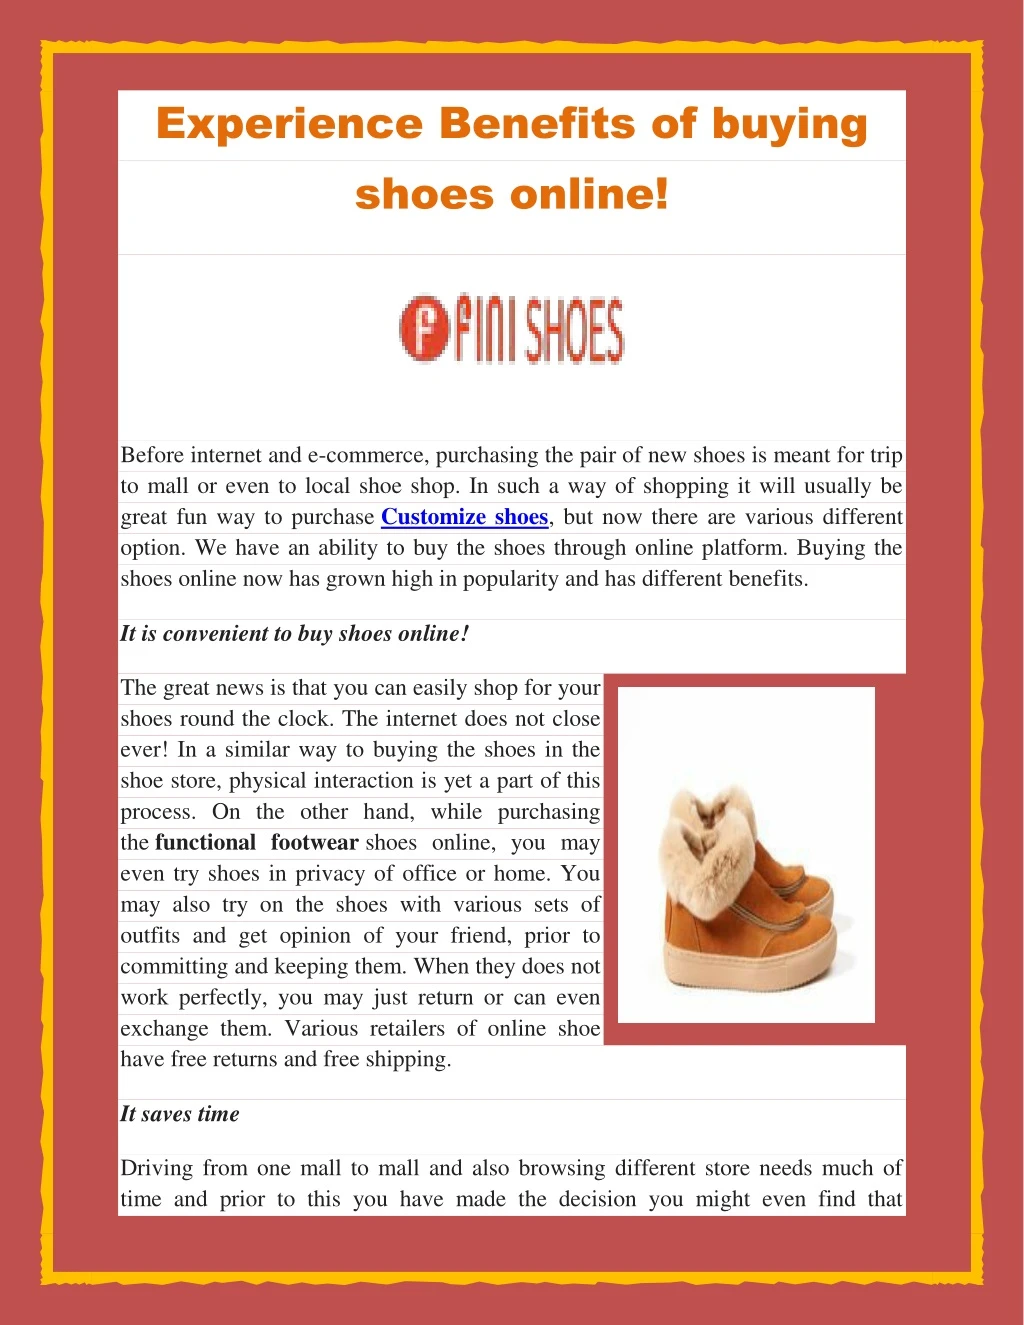 experience benefits of buying shoes online